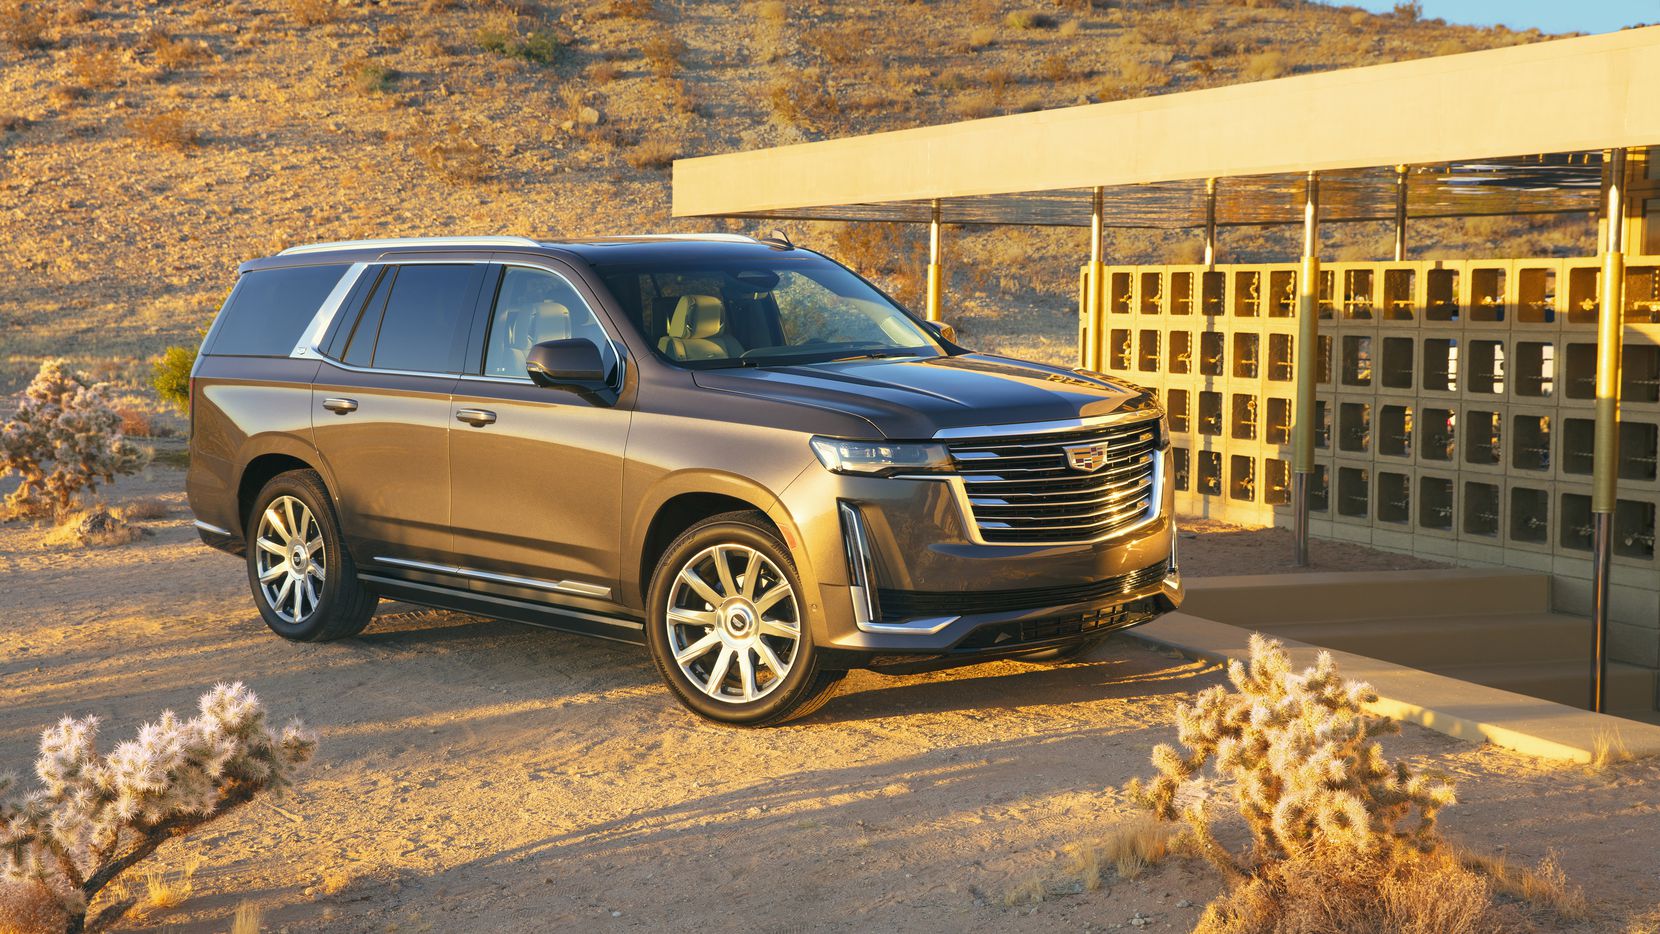 New from the ground up for 2021, Cadillac’s Escalade flagship has features, technology and...